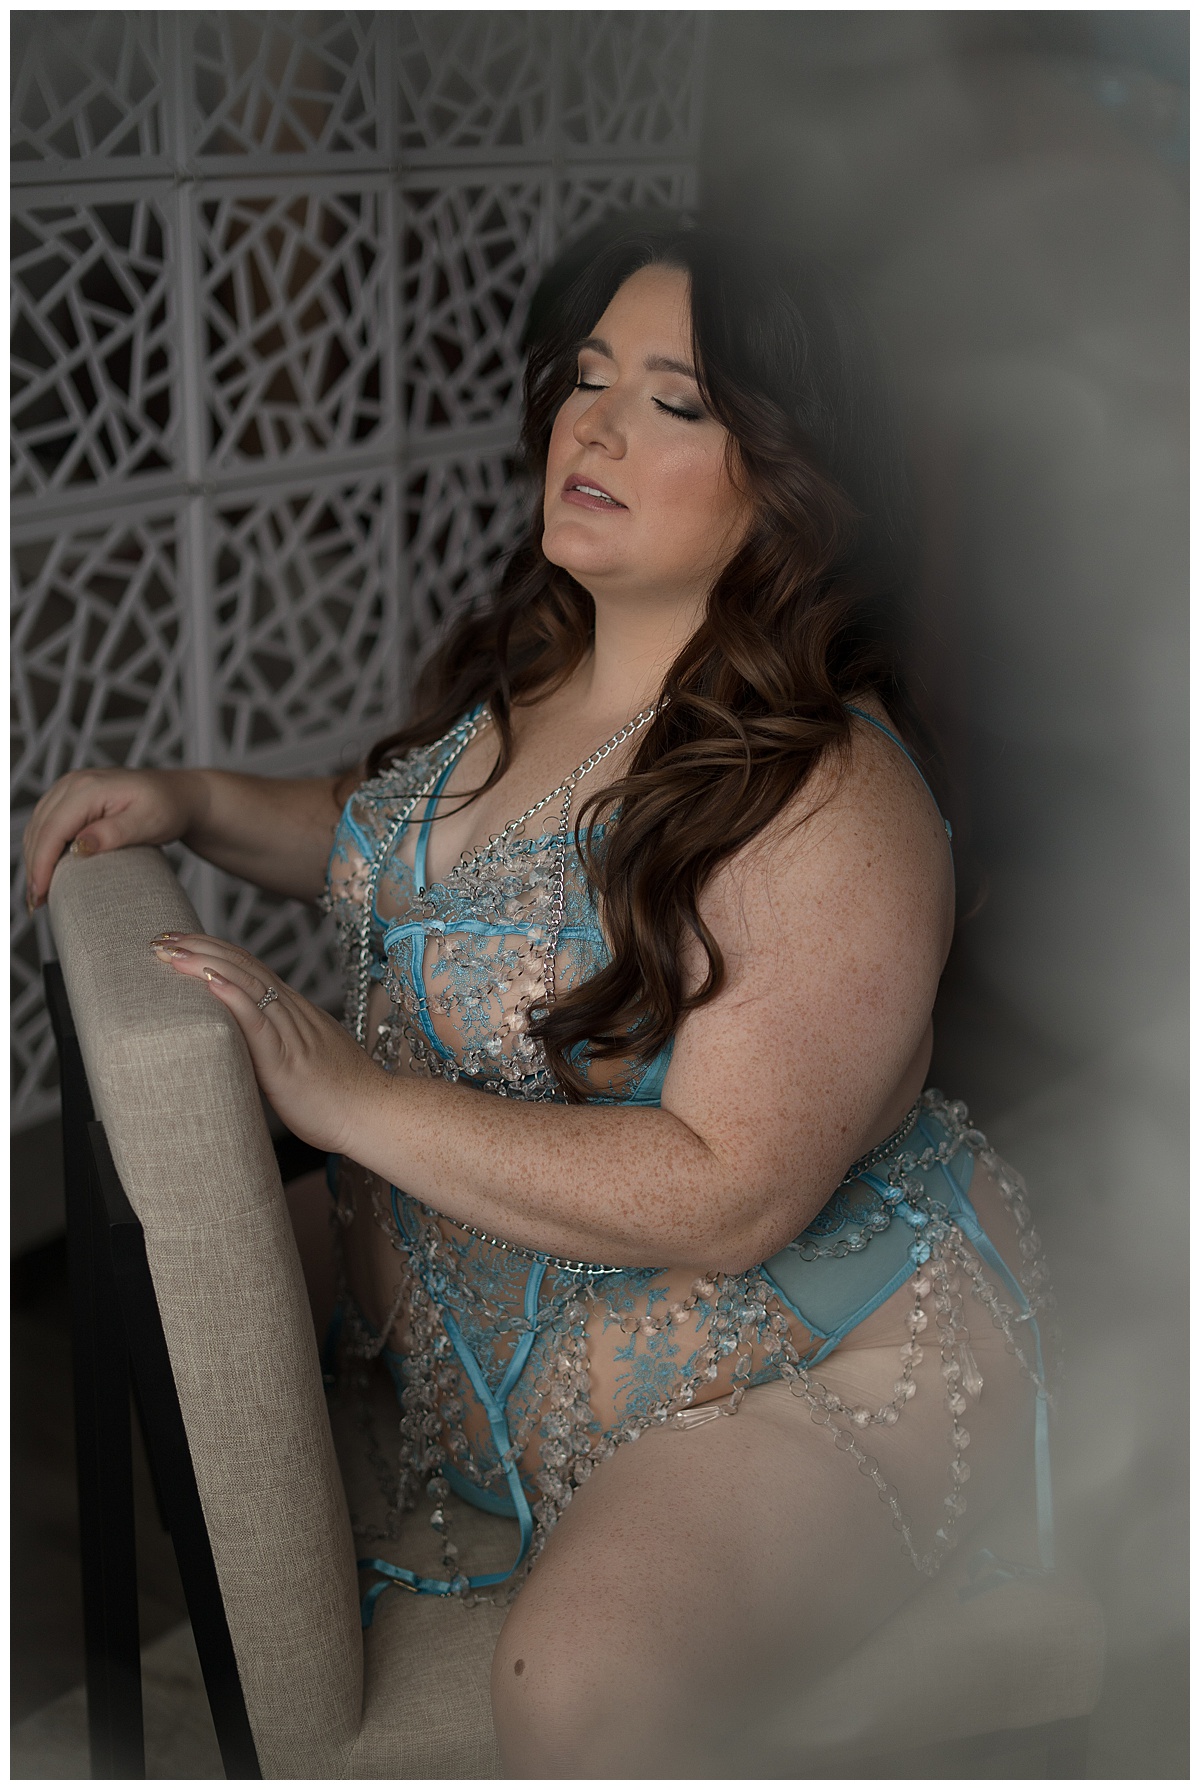 Female sits on chair in Lingerie Accessories